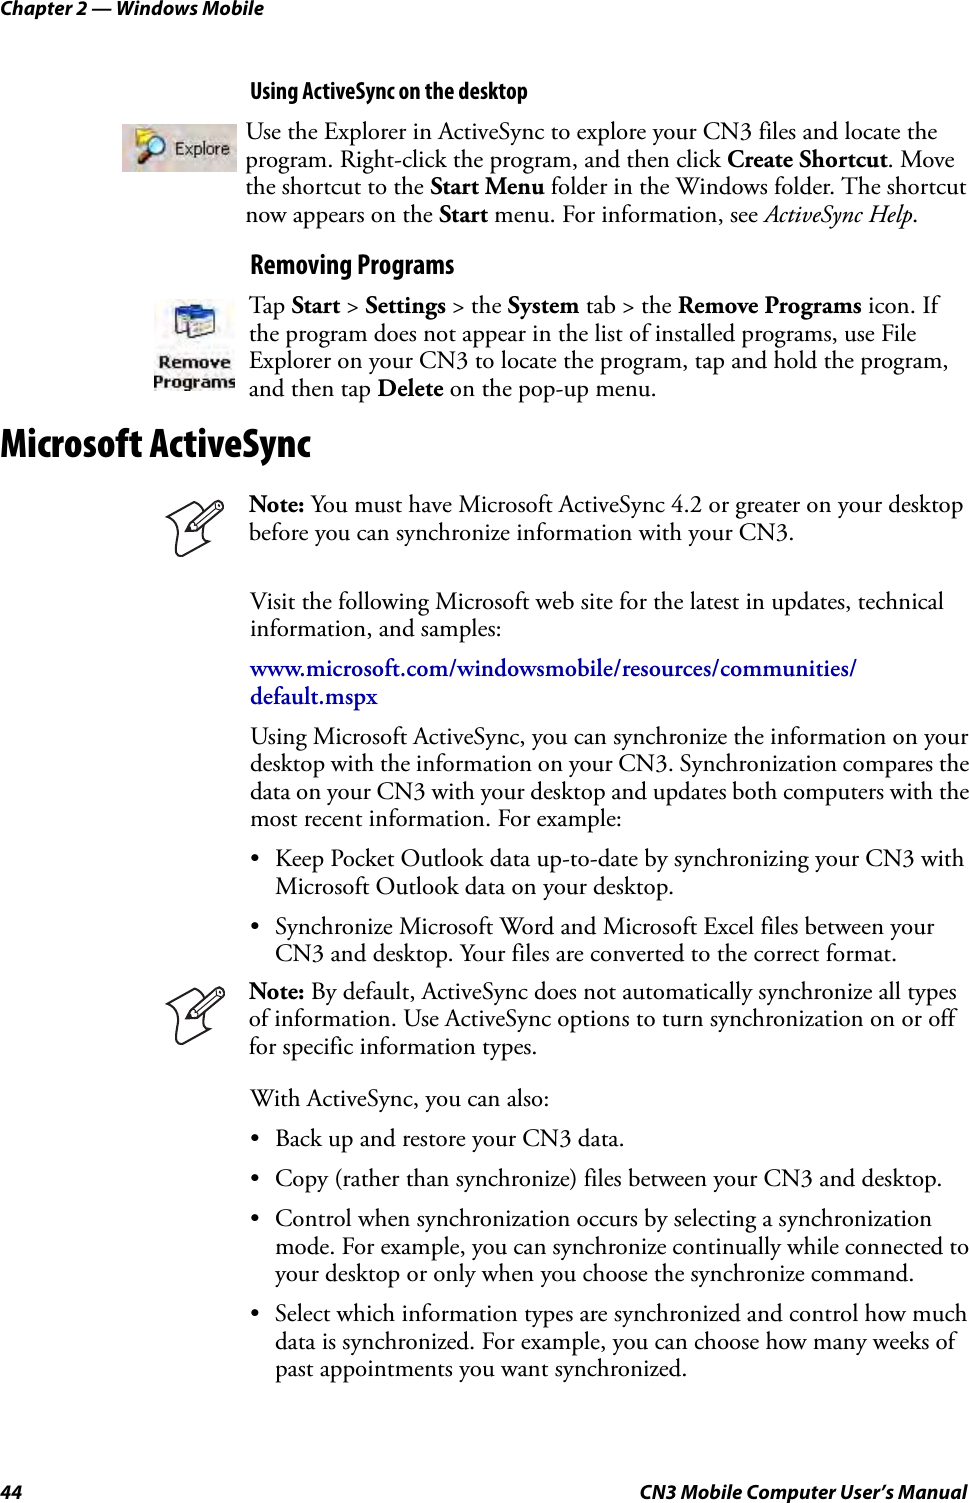 Chapter 2 — Windows Mobile44 CN3 Mobile Computer User’s ManualUsing ActiveSync on the desktopRemoving ProgramsMicrosoft ActiveSyncVisit the following Microsoft web site for the latest in updates, technical information, and samples:www.microsoft.com/windowsmobile/resources/communities/default.mspxUsing Microsoft ActiveSync, you can synchronize the information on your desktop with the information on your CN3. Synchronization compares the data on your CN3 with your desktop and updates both computers with the most recent information. For example:• Keep Pocket Outlook data up-to-date by synchronizing your CN3 with Microsoft Outlook data on your desktop.• Synchronize Microsoft Word and Microsoft Excel files between your CN3 and desktop. Your files are converted to the correct format.With ActiveSync, you can also:• Back up and restore your CN3 data.• Copy (rather than synchronize) files between your CN3 and desktop.• Control when synchronization occurs by selecting a synchronization mode. For example, you can synchronize continually while connected to your desktop or only when you choose the synchronize command.• Select which information types are synchronized and control how much data is synchronized. For example, you can choose how many weeks of past appointments you want synchronized.Use the Explorer in ActiveSync to explore your CN3 files and locate the program. Right-click the program, and then click Create Shortcut. Move the shortcut to the Start Menu folder in the Windows folder. The shortcut now appears on the Start menu. For information, see ActiveSync Help.Tap  Start &gt; Settings &gt; the System tab &gt; the Remove Programs icon. If the program does not appear in the list of installed programs, use File Explorer on your CN3 to locate the program, tap and hold the program, and then tap Delete on the pop-up menu.Note: You must have Microsoft ActiveSync 4.2 or greater on your desktop before you can synchronize information with your CN3.Note: By default, ActiveSync does not automatically synchronize all types of information. Use ActiveSync options to turn synchronization on or off for specific information types.